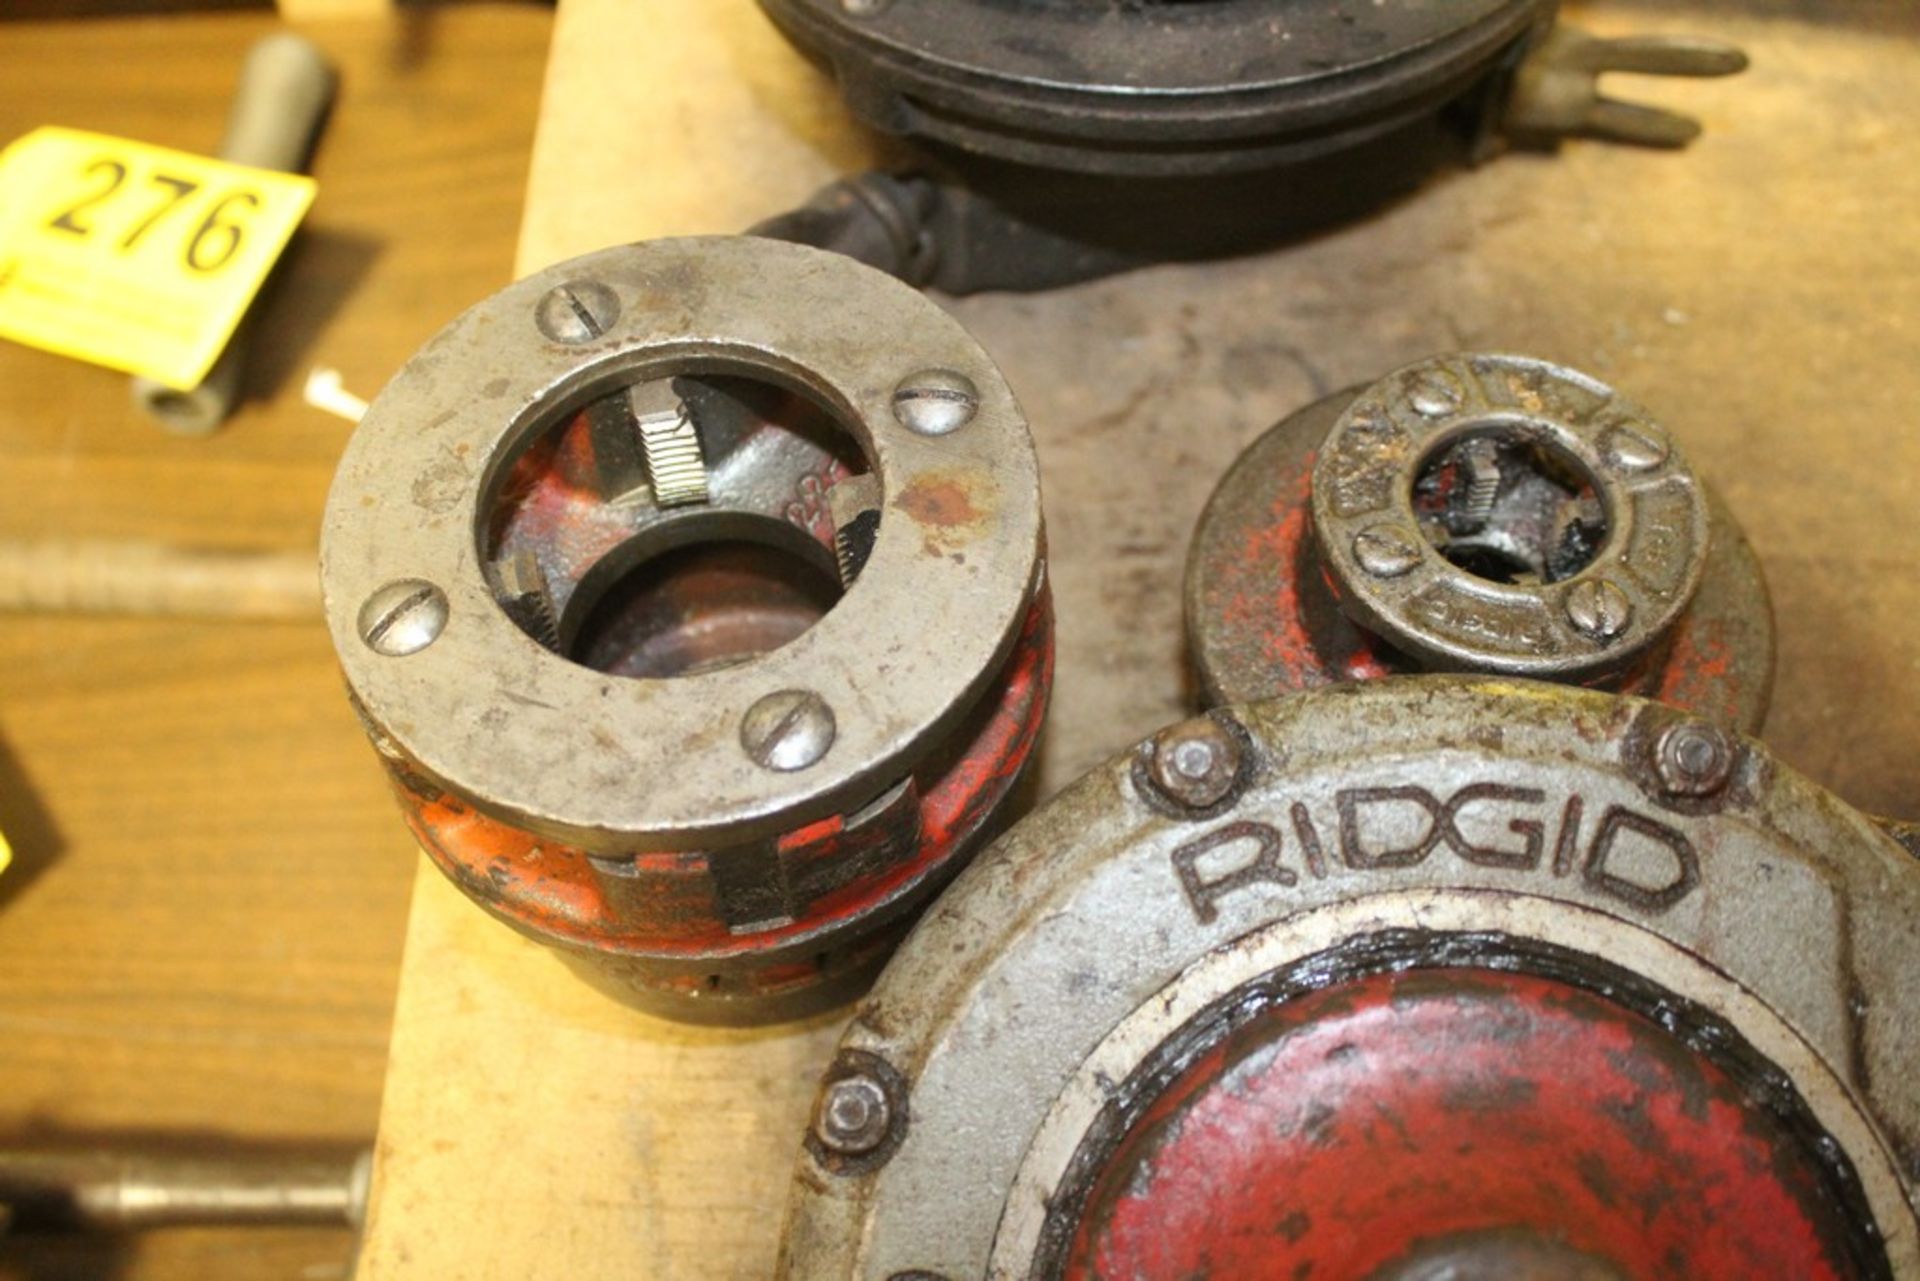 RIDGID NO. 700 POWER DRIVE PORTABLE PIPE THREADER WITH (3) DIES - Image 4 of 4